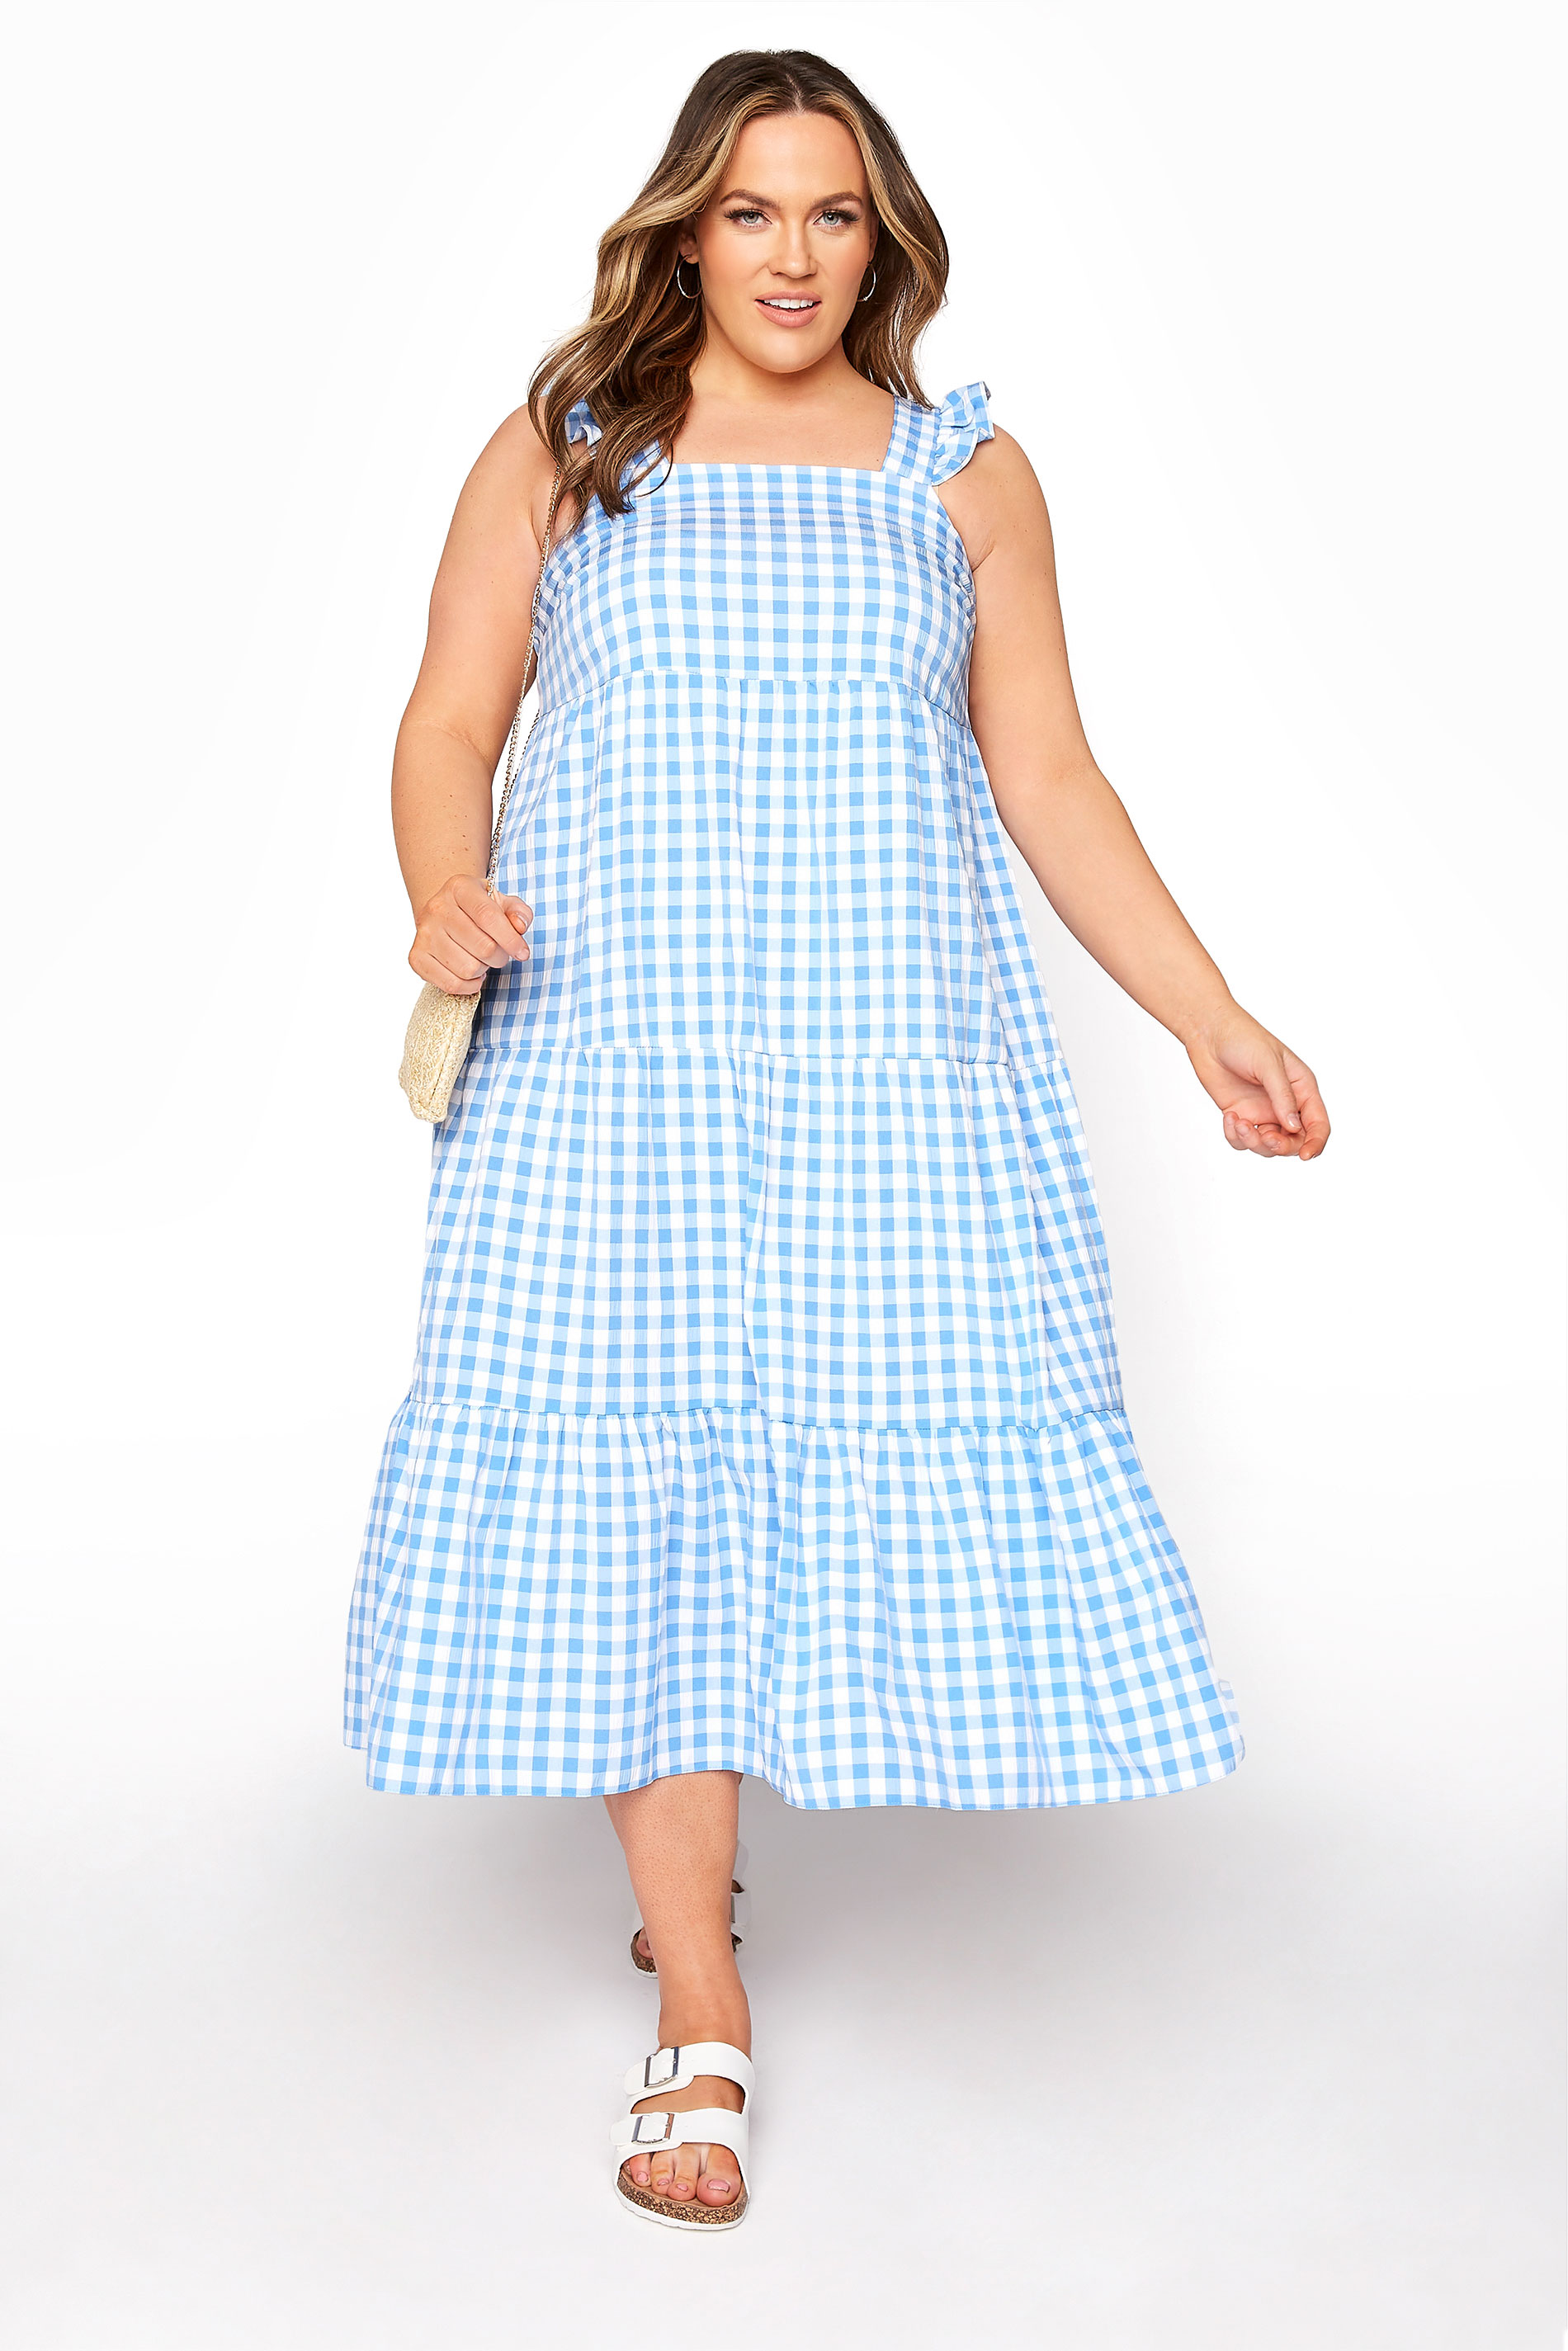 YOURS LONDON Blue Gingham Frill Dress ...